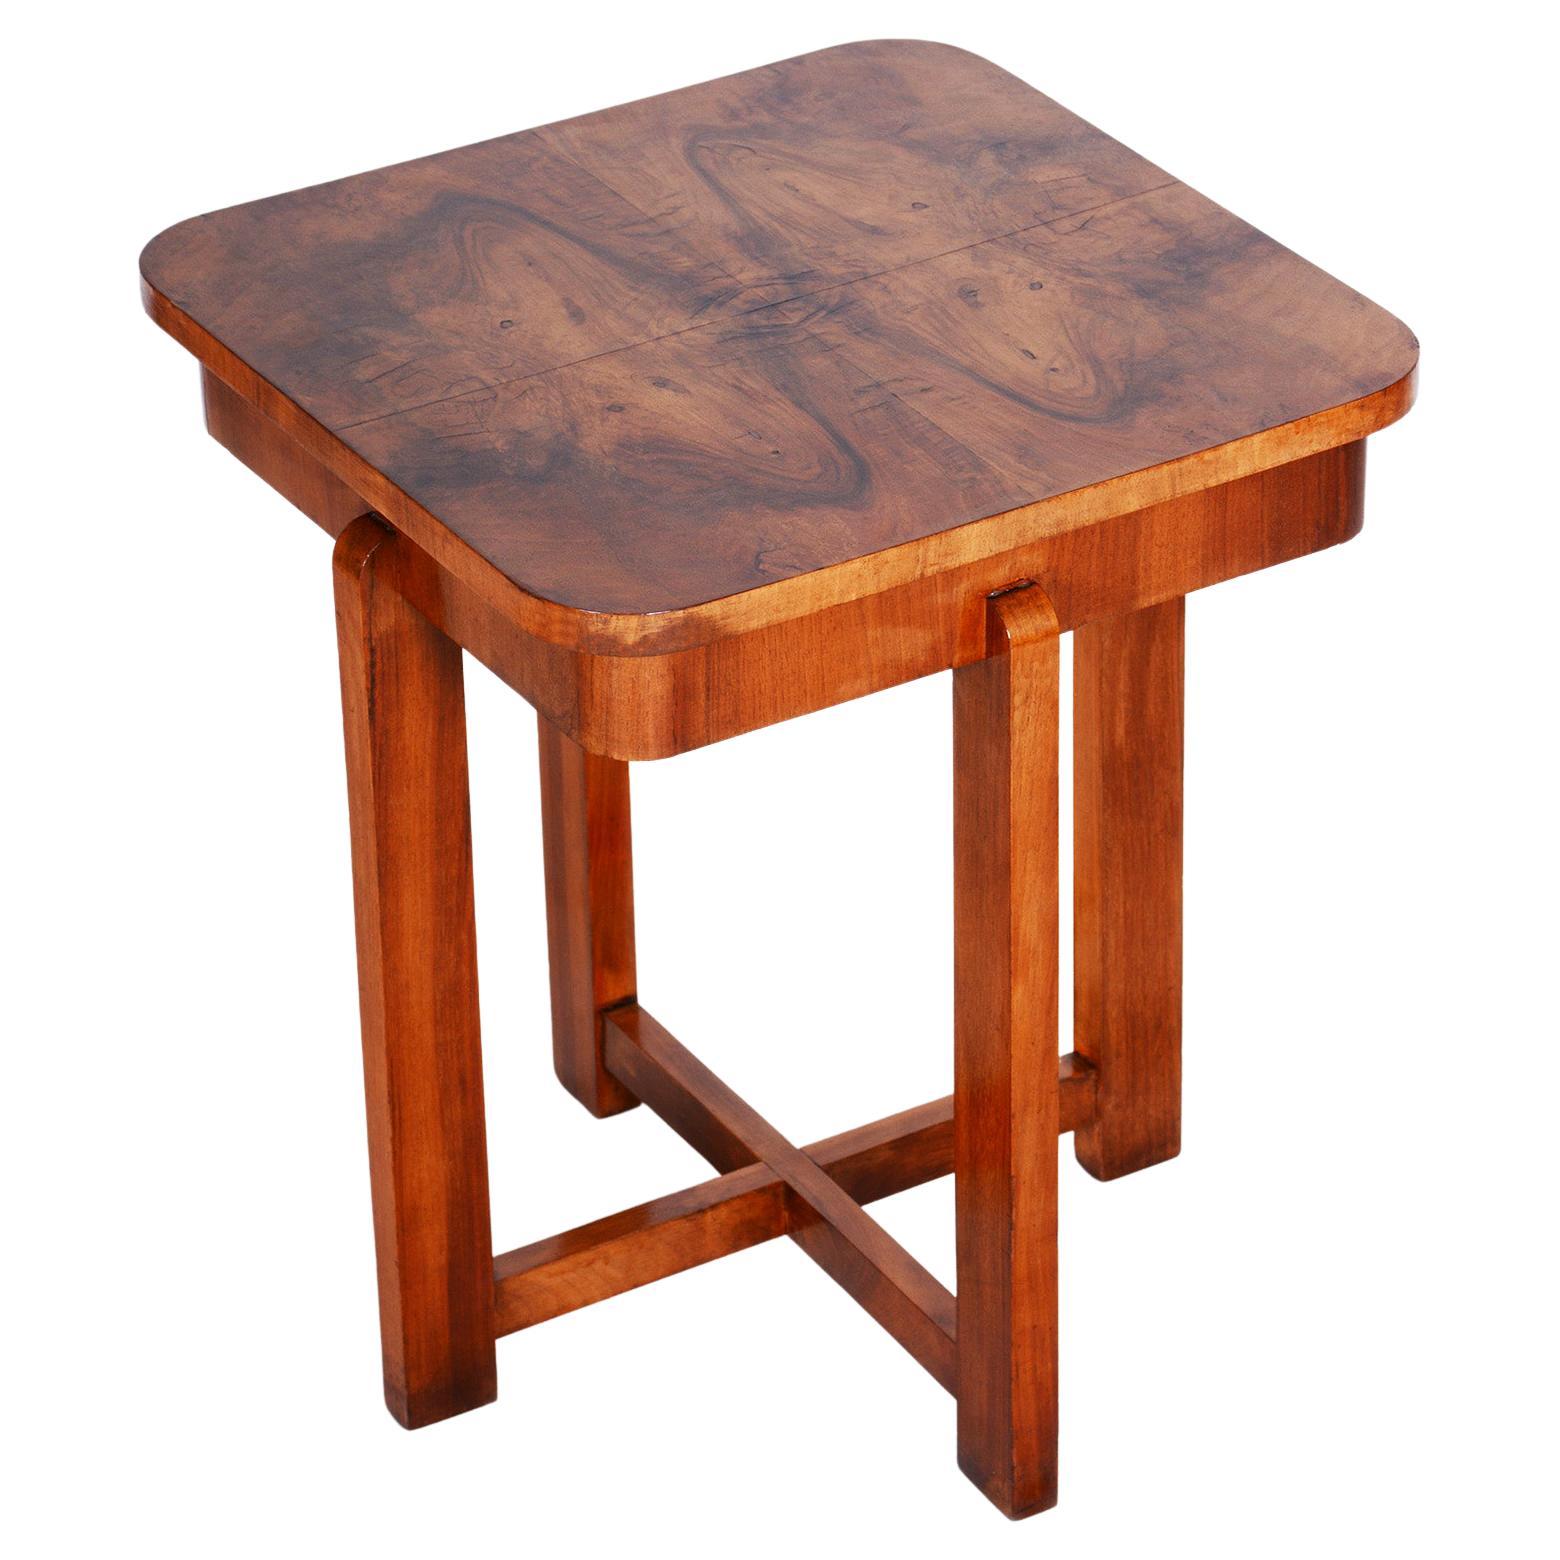 Small Czech Art Deco Table, Made in the 1930s Out of Walnut, Fully Restored